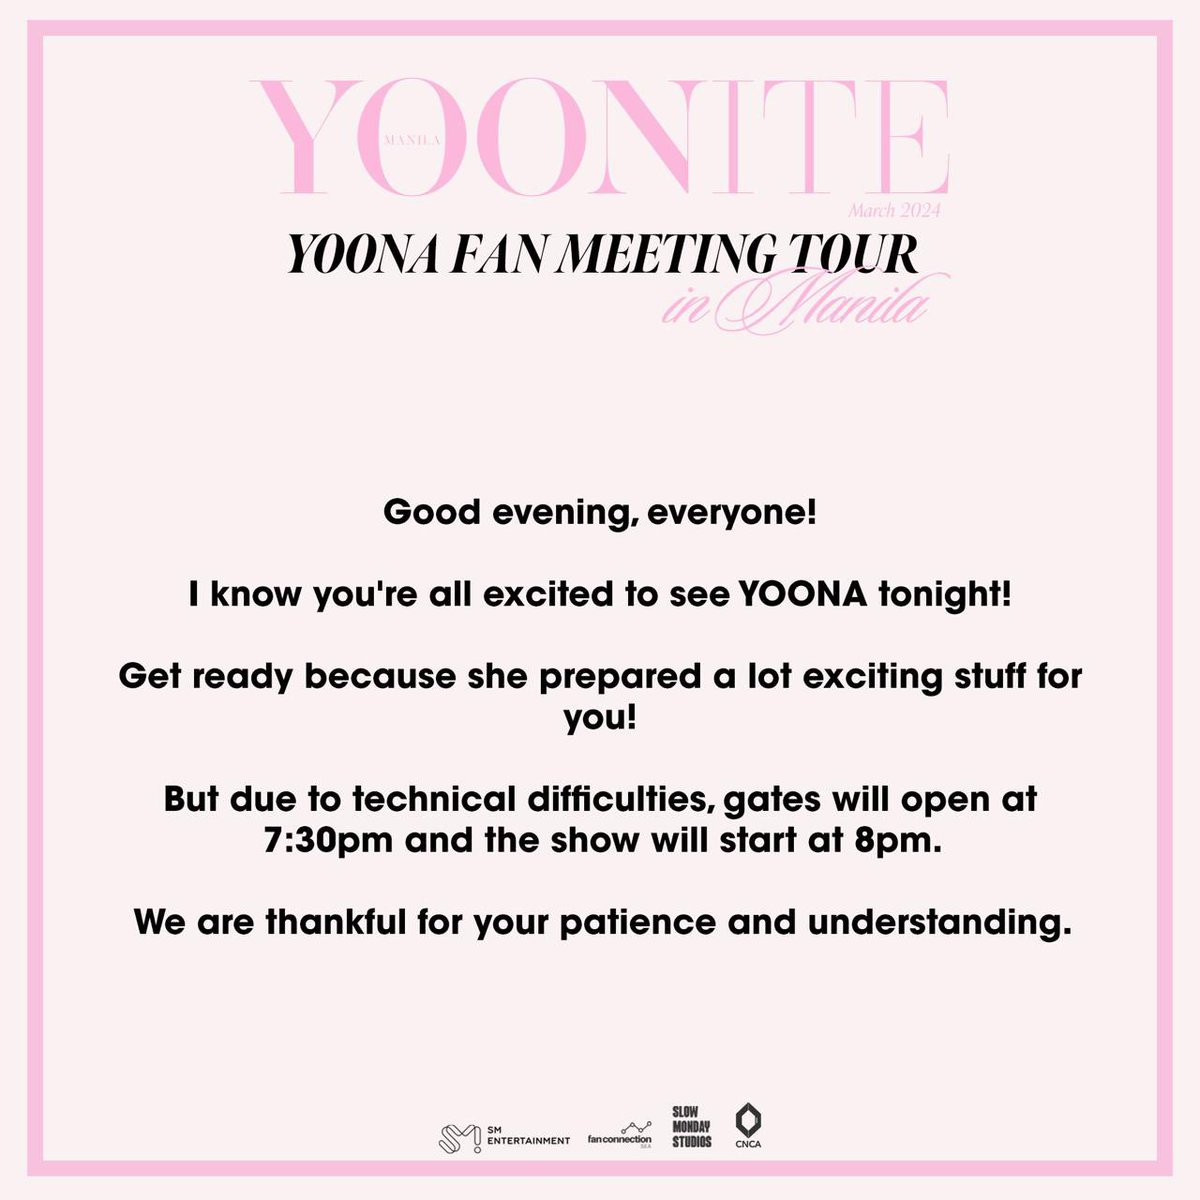 Hello, everyone! I know you're all excited to see YOONA tonight! Get ready because she prepared a lot exciting stuff for you! But due to technical difficulties, gates will open at 7:30pm and the show will start at 8pm. We are thankful for your patience and understanding.